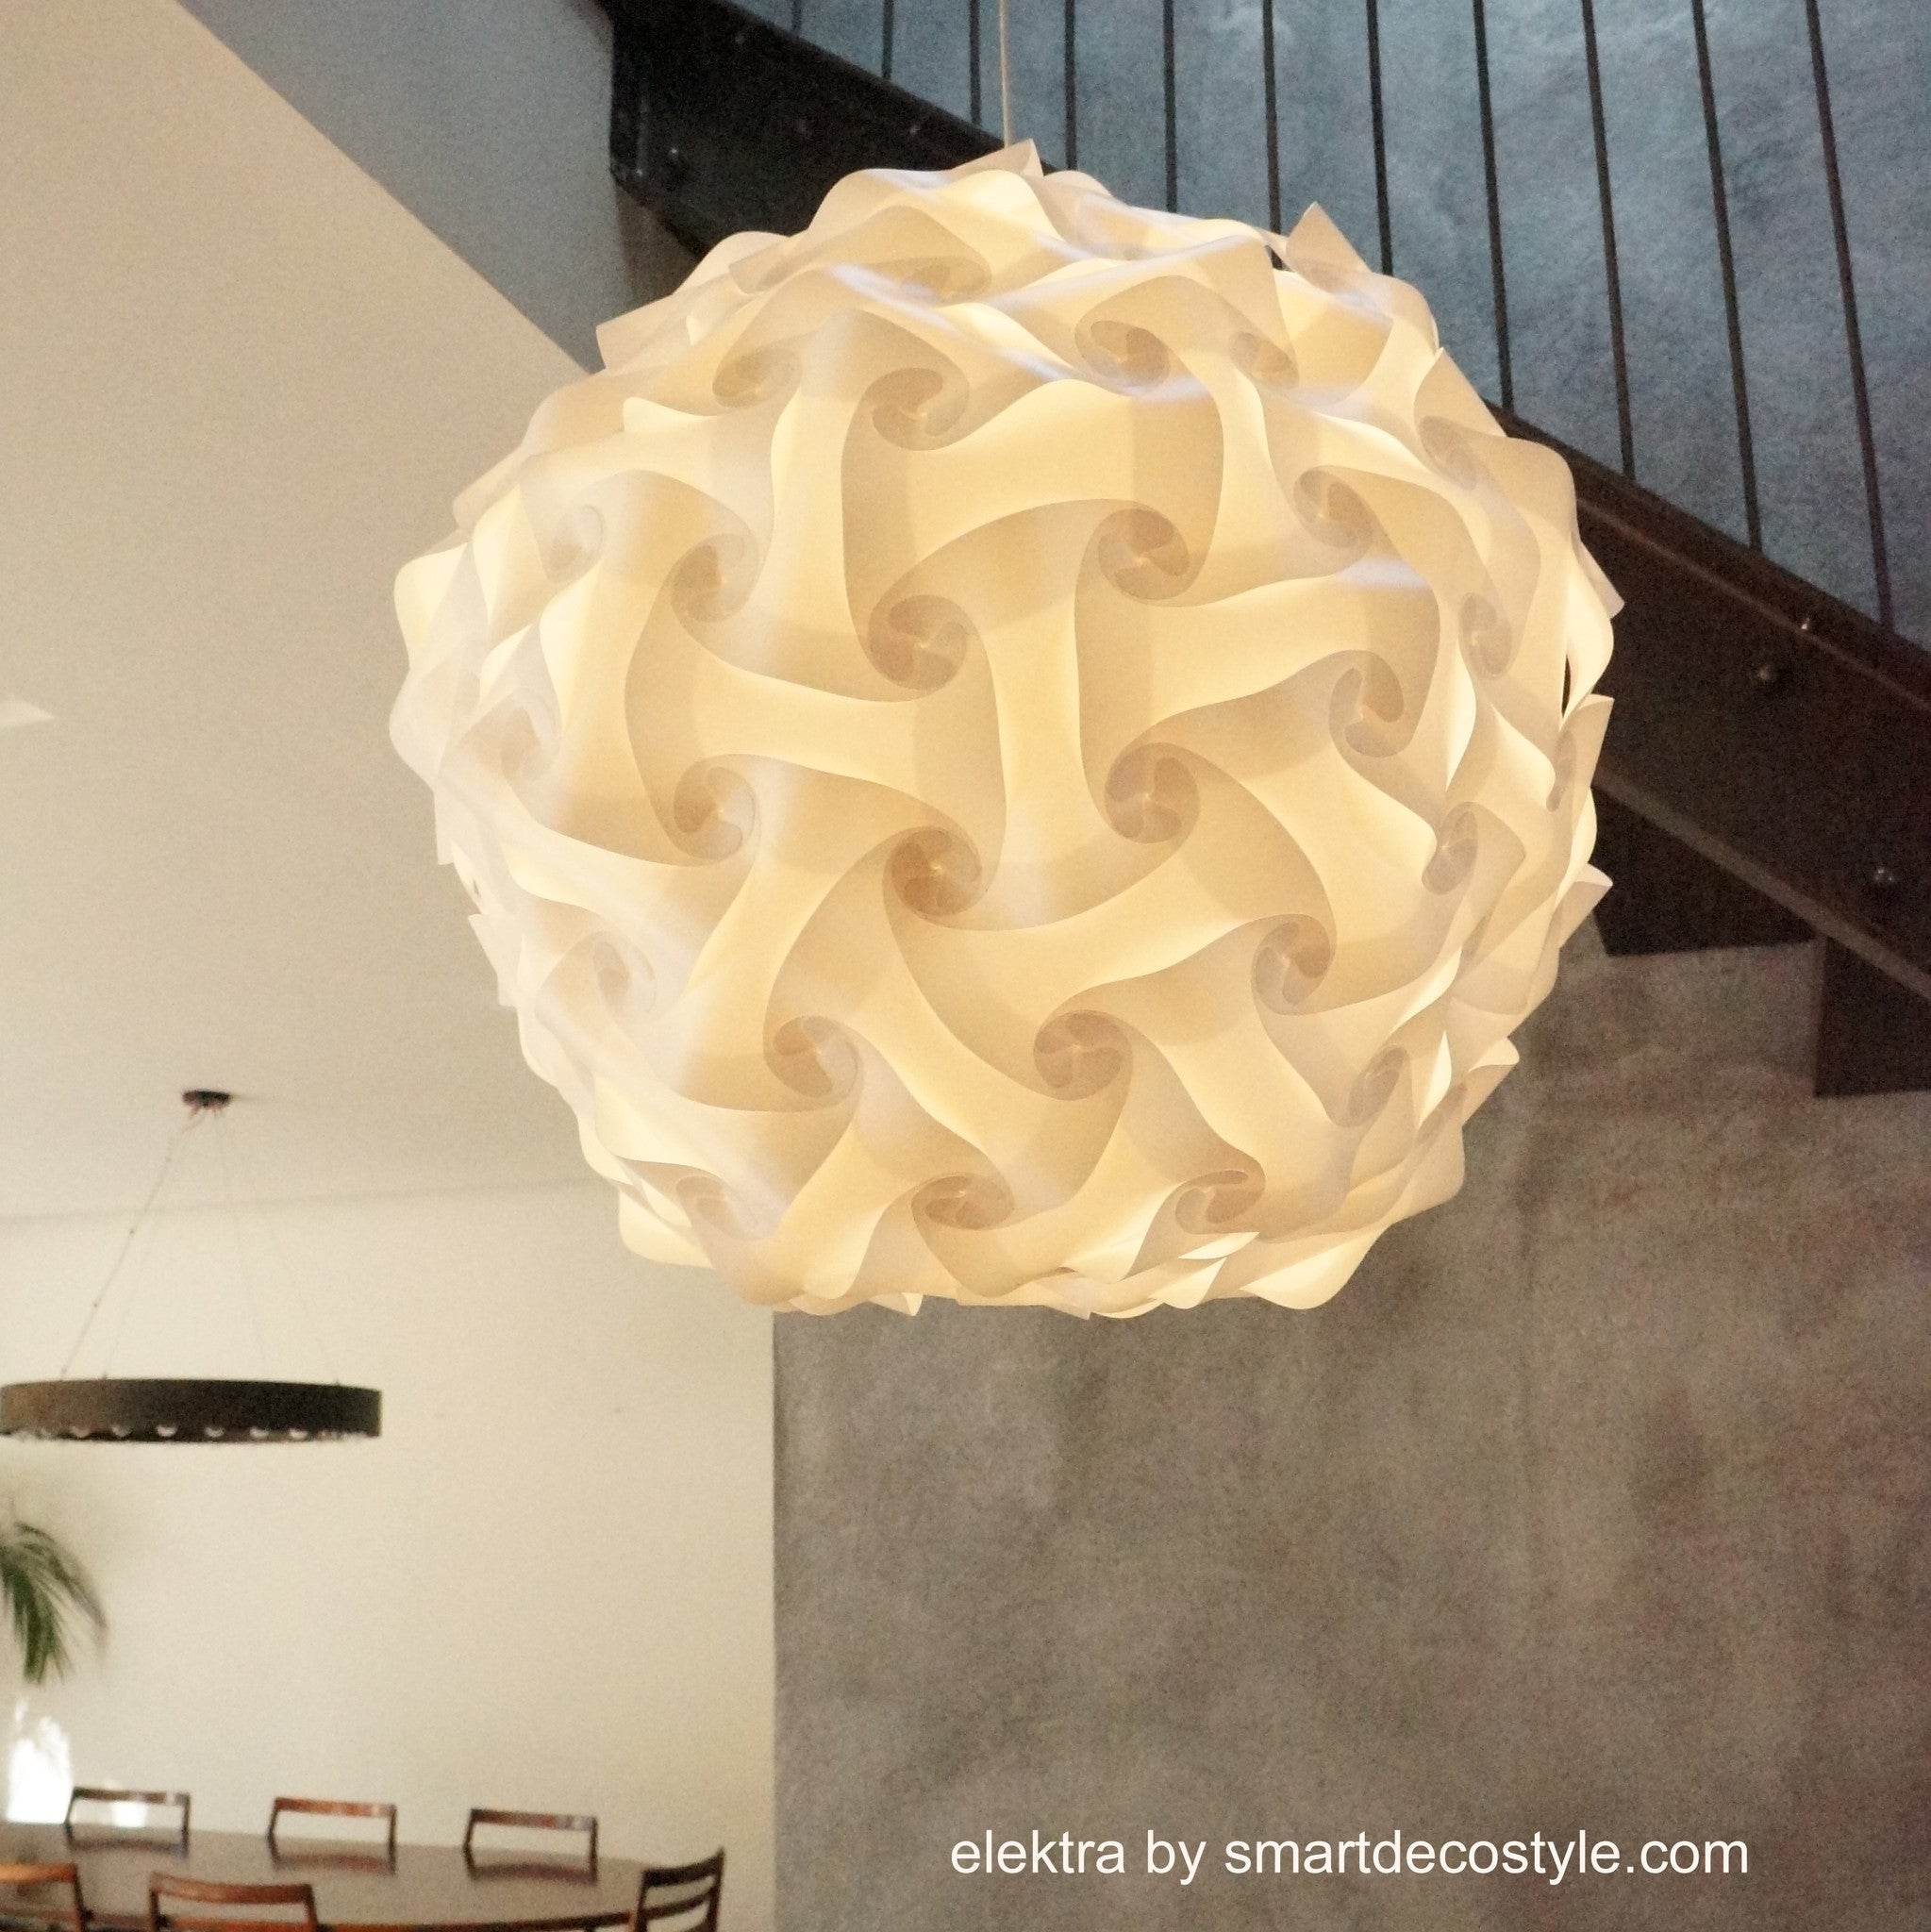 Smarty Lamps Elektra Ceiling Light Shade  Smart Deco Homeware Lighting and Art by Jacqueline hammond